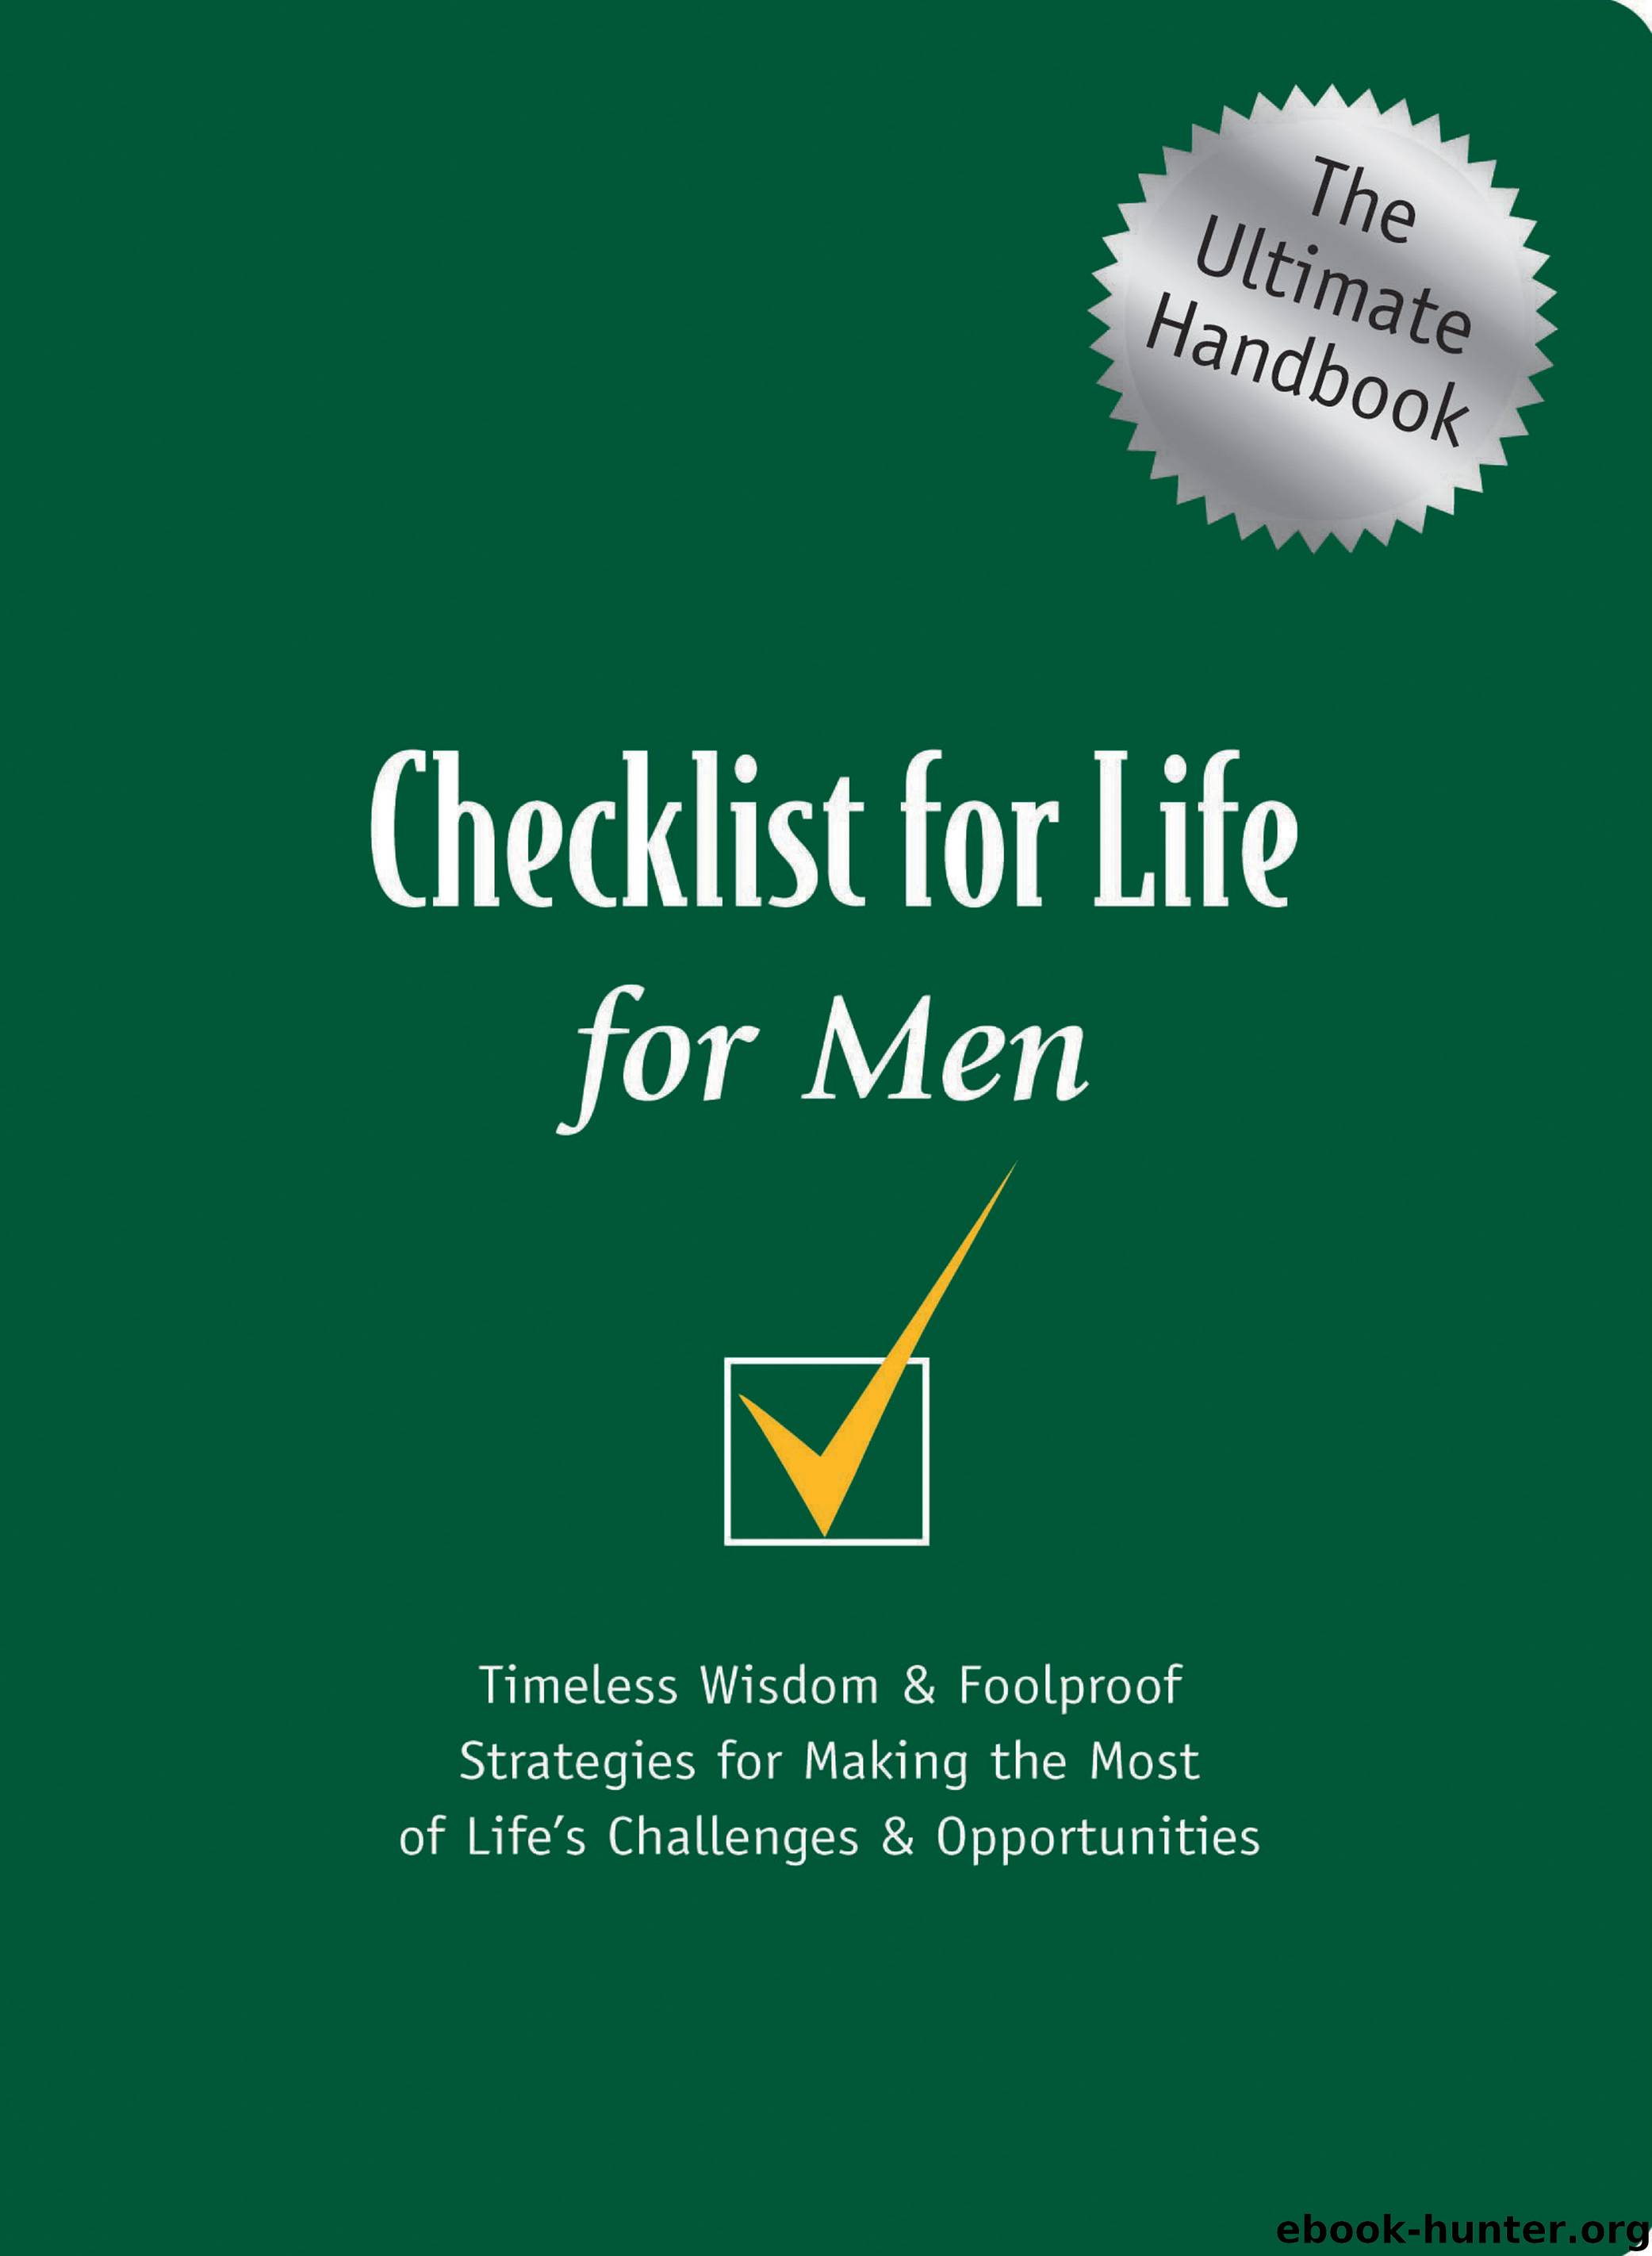 Checklist for Life for Men by Checklist for Life